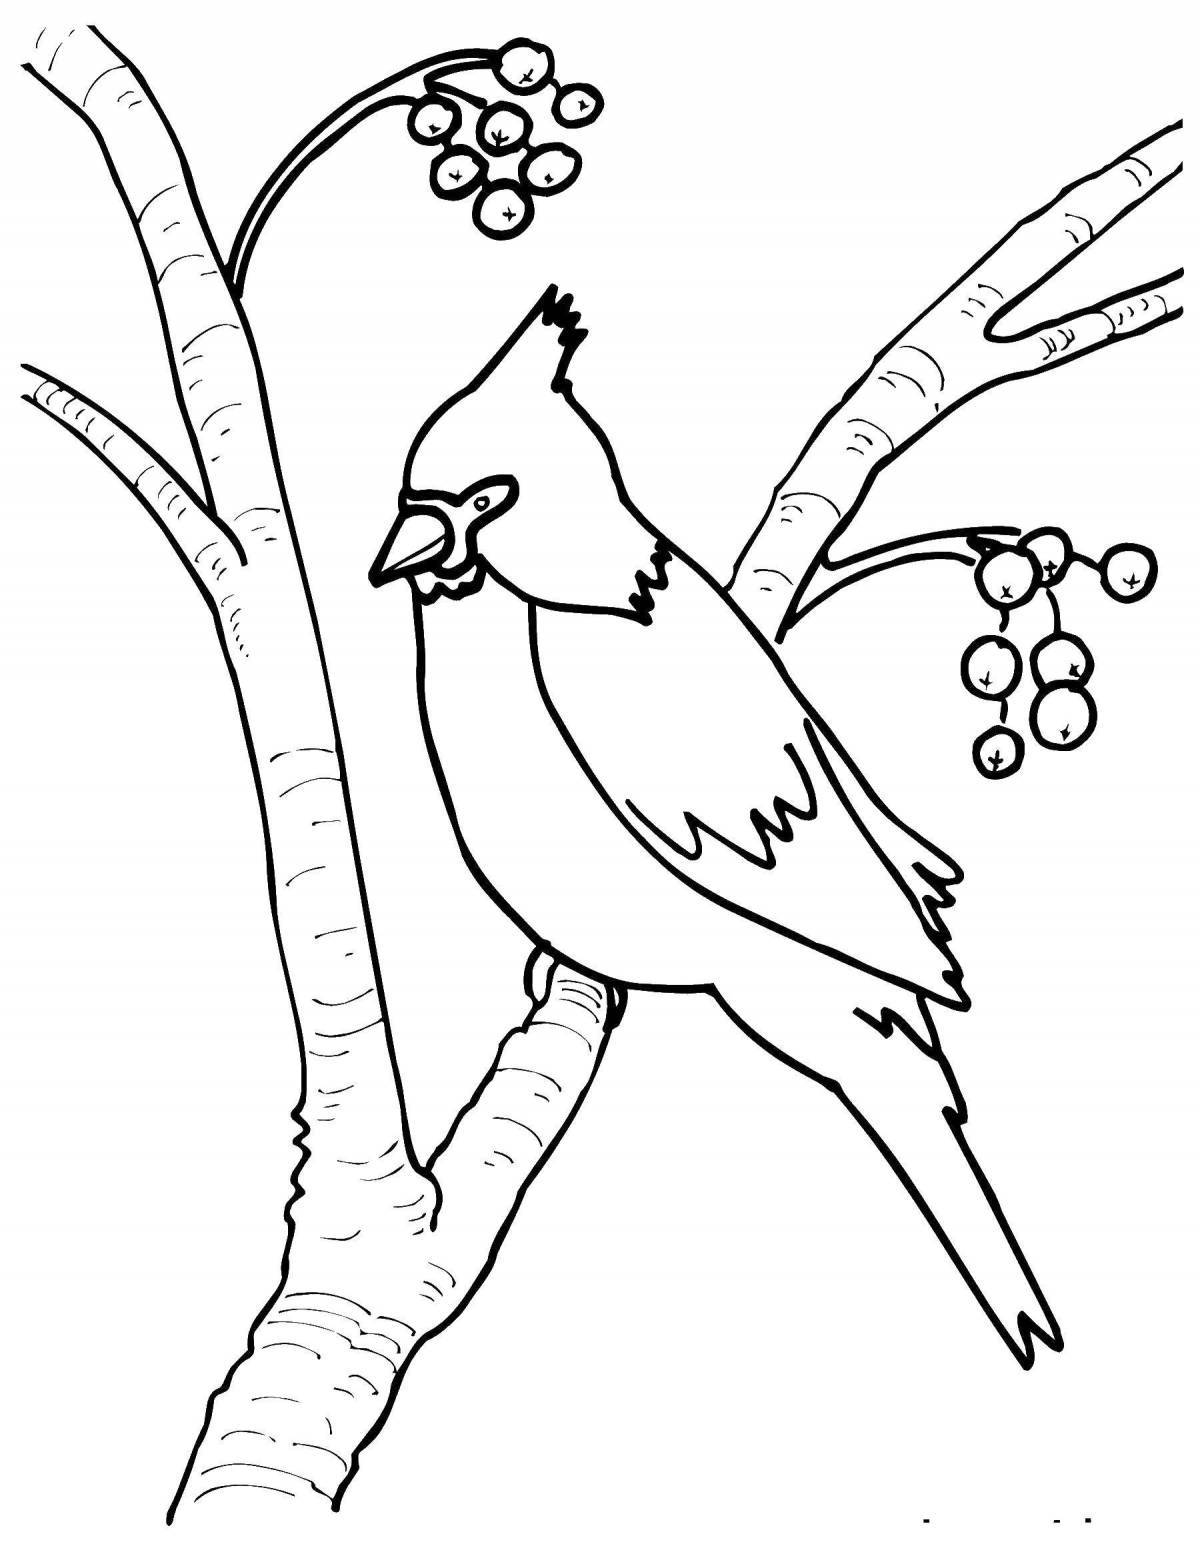 A spectacular bird coloring page for 6-7 year olds